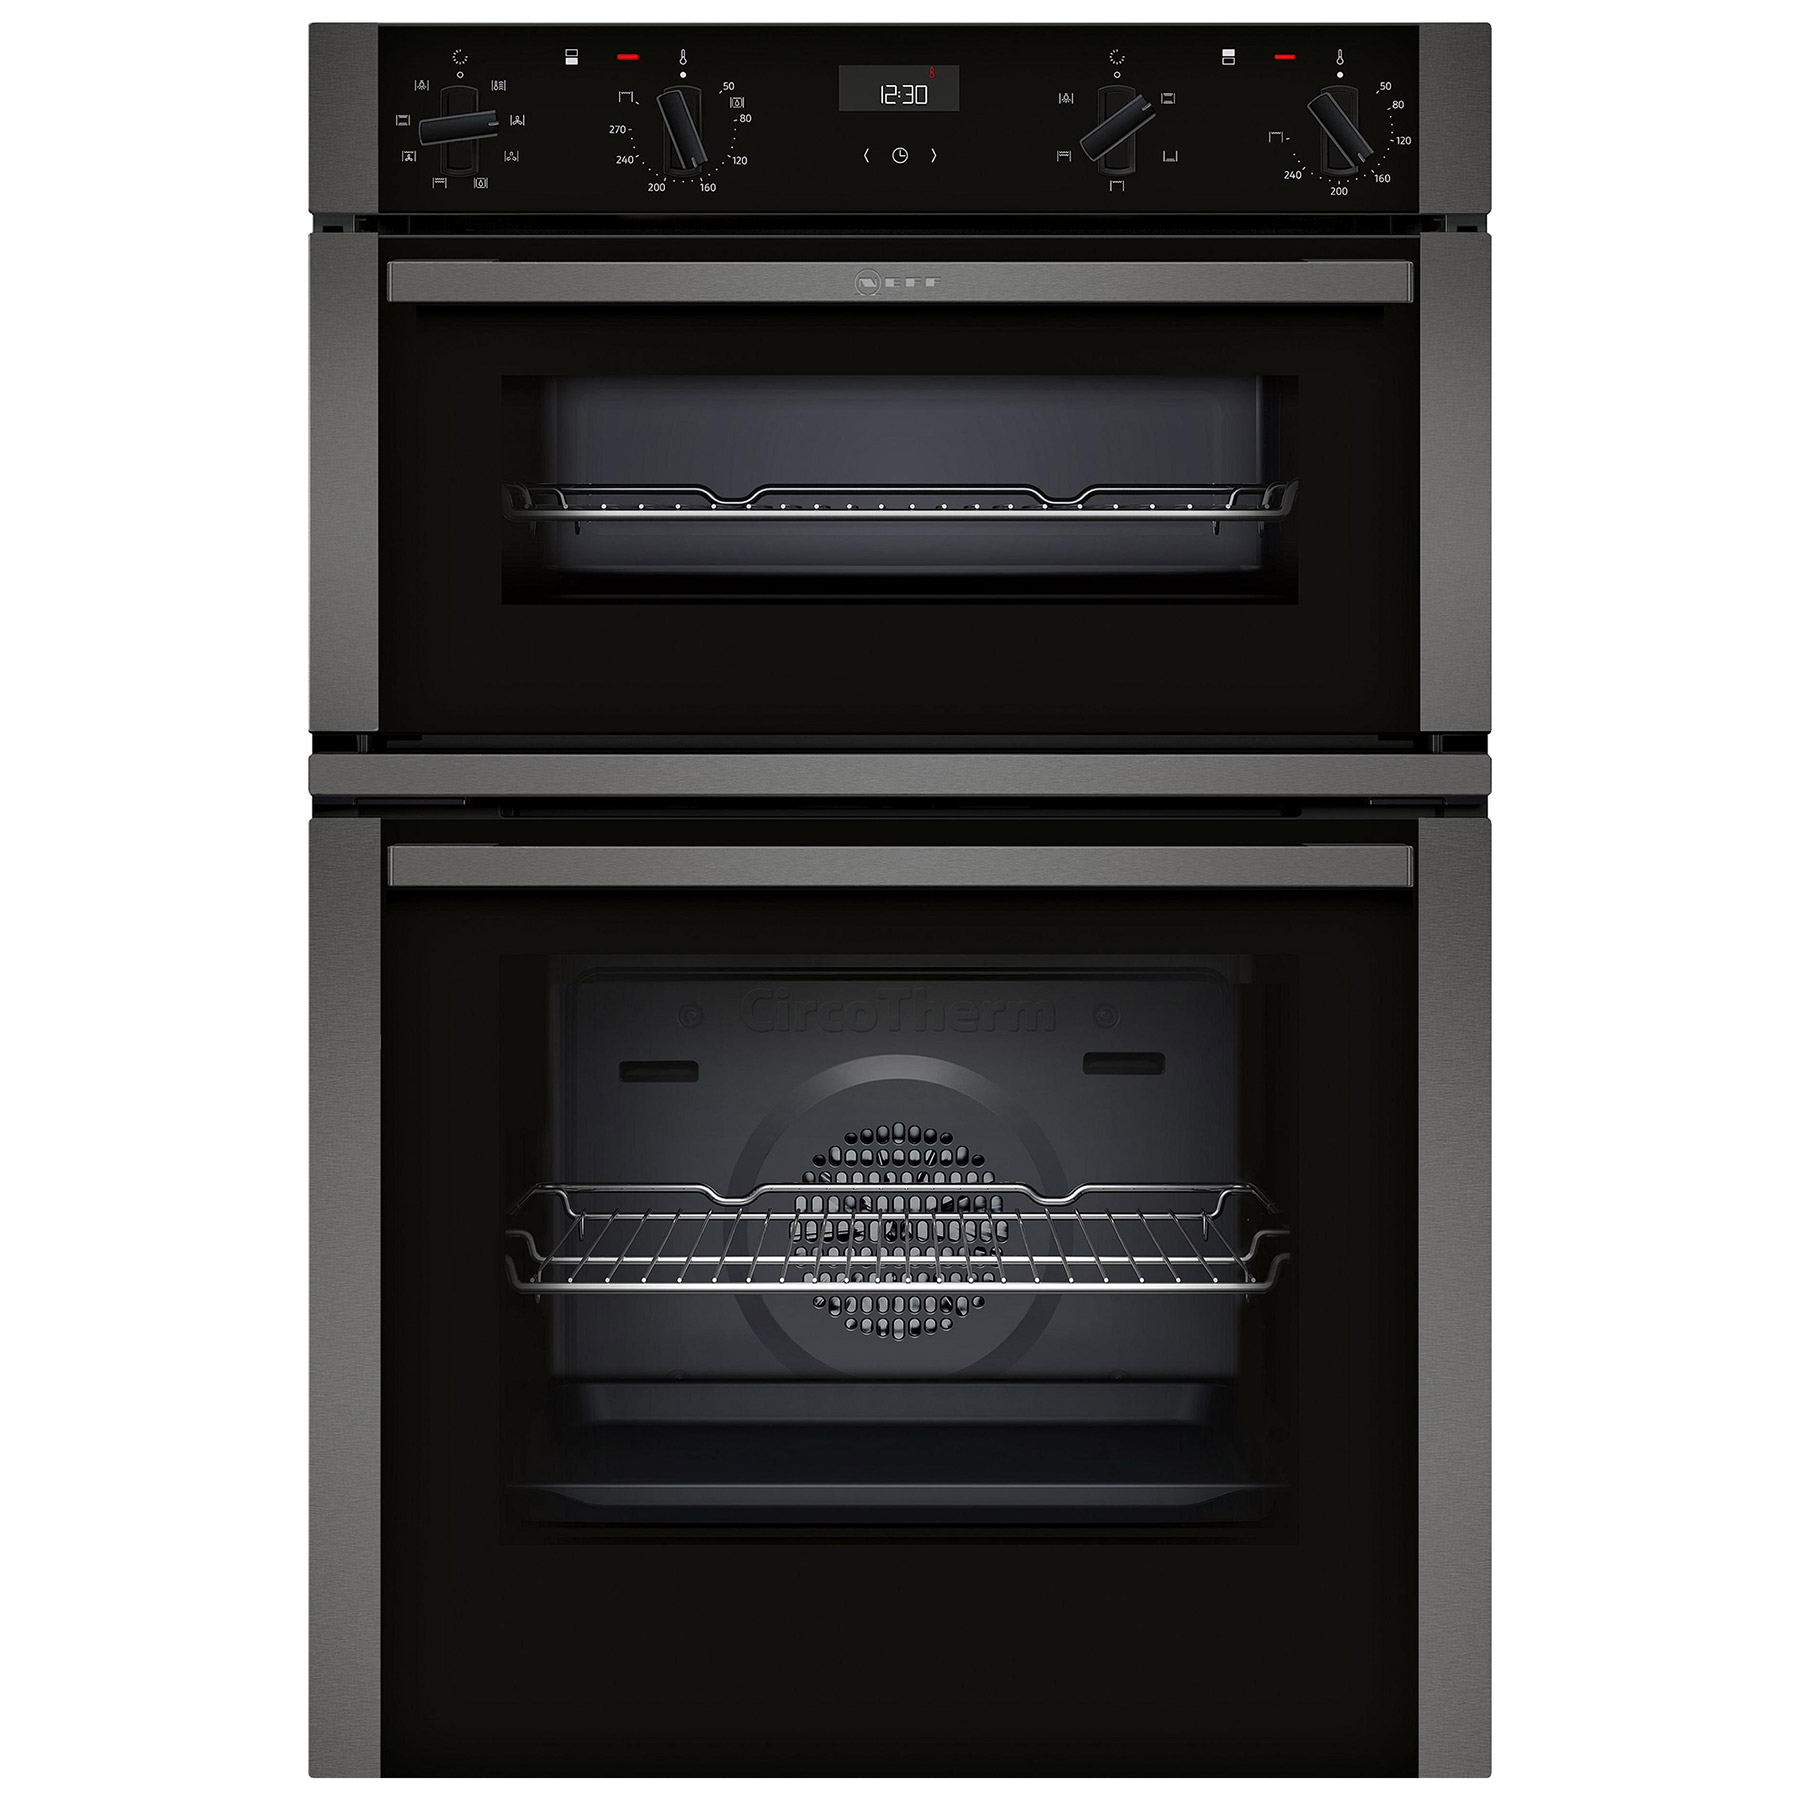 Image of Neff U1ACE2HG0B N50 88cm Built In Electric Double Oven Black Graphite